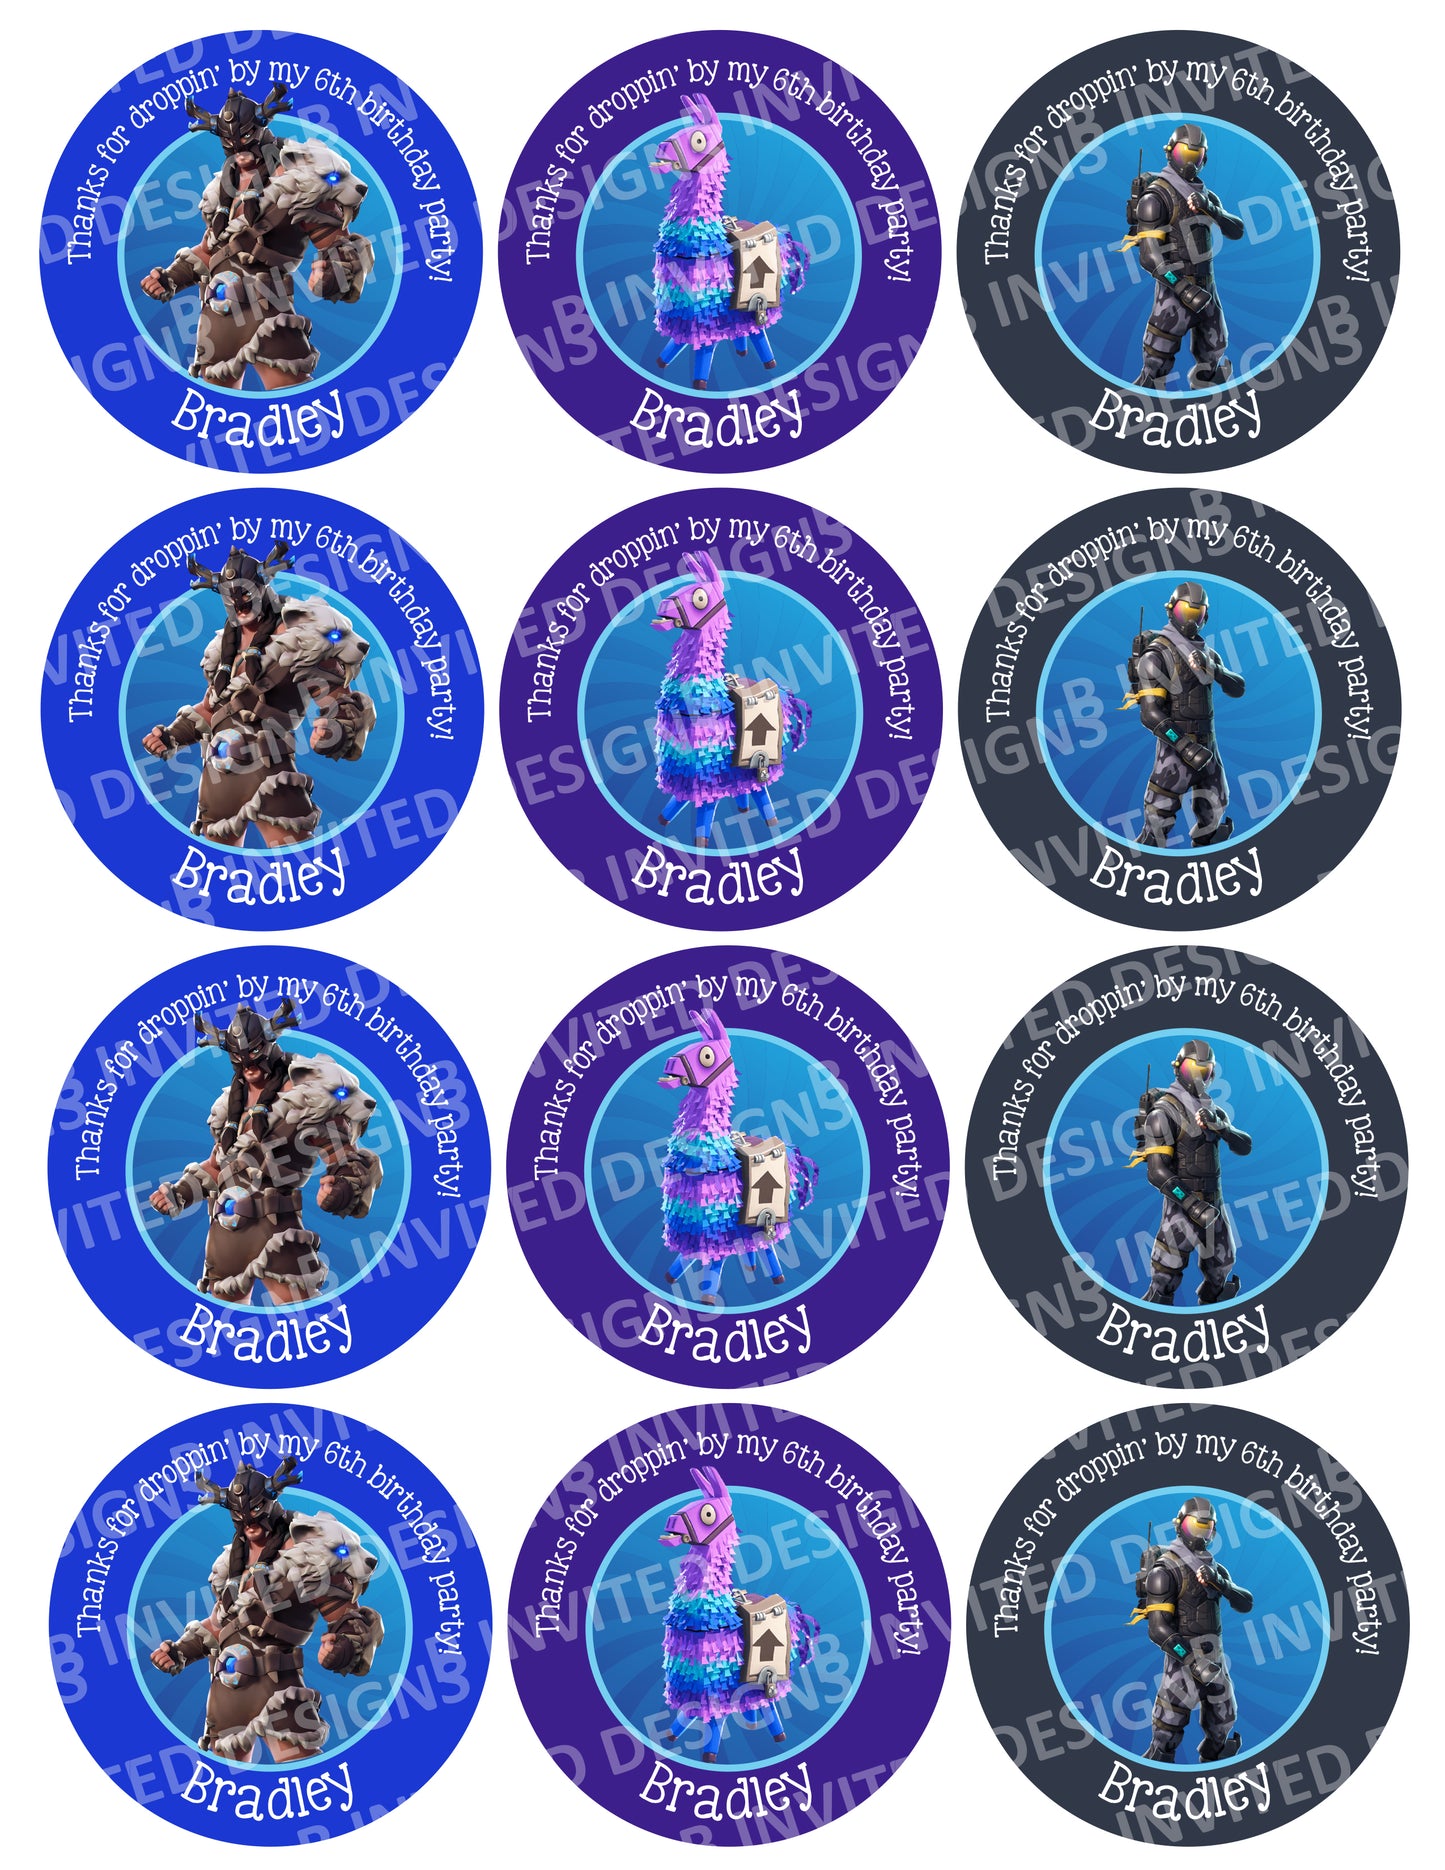 FORTNITE Party Digital or Printed Custom Stickers for Gift Bags, Party Favors!